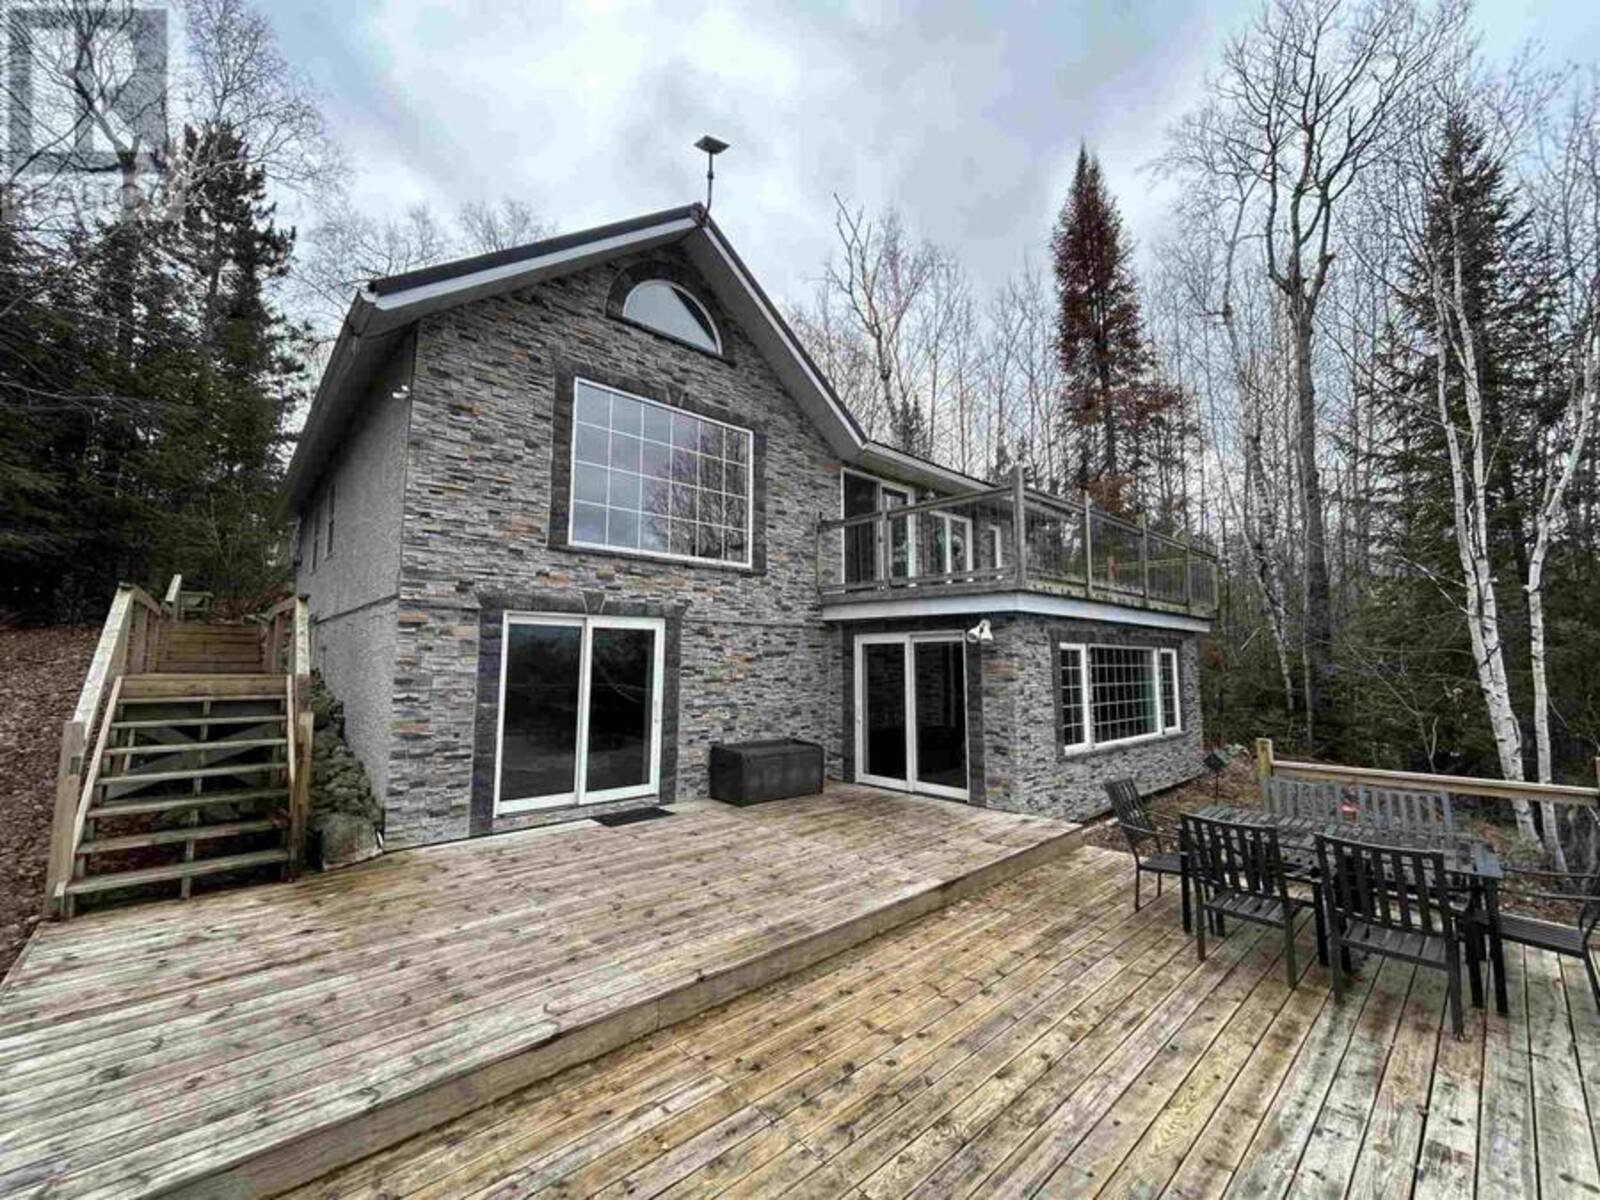 402C REEF POINT RD, Fort Frances, Ontario P9A 3M2